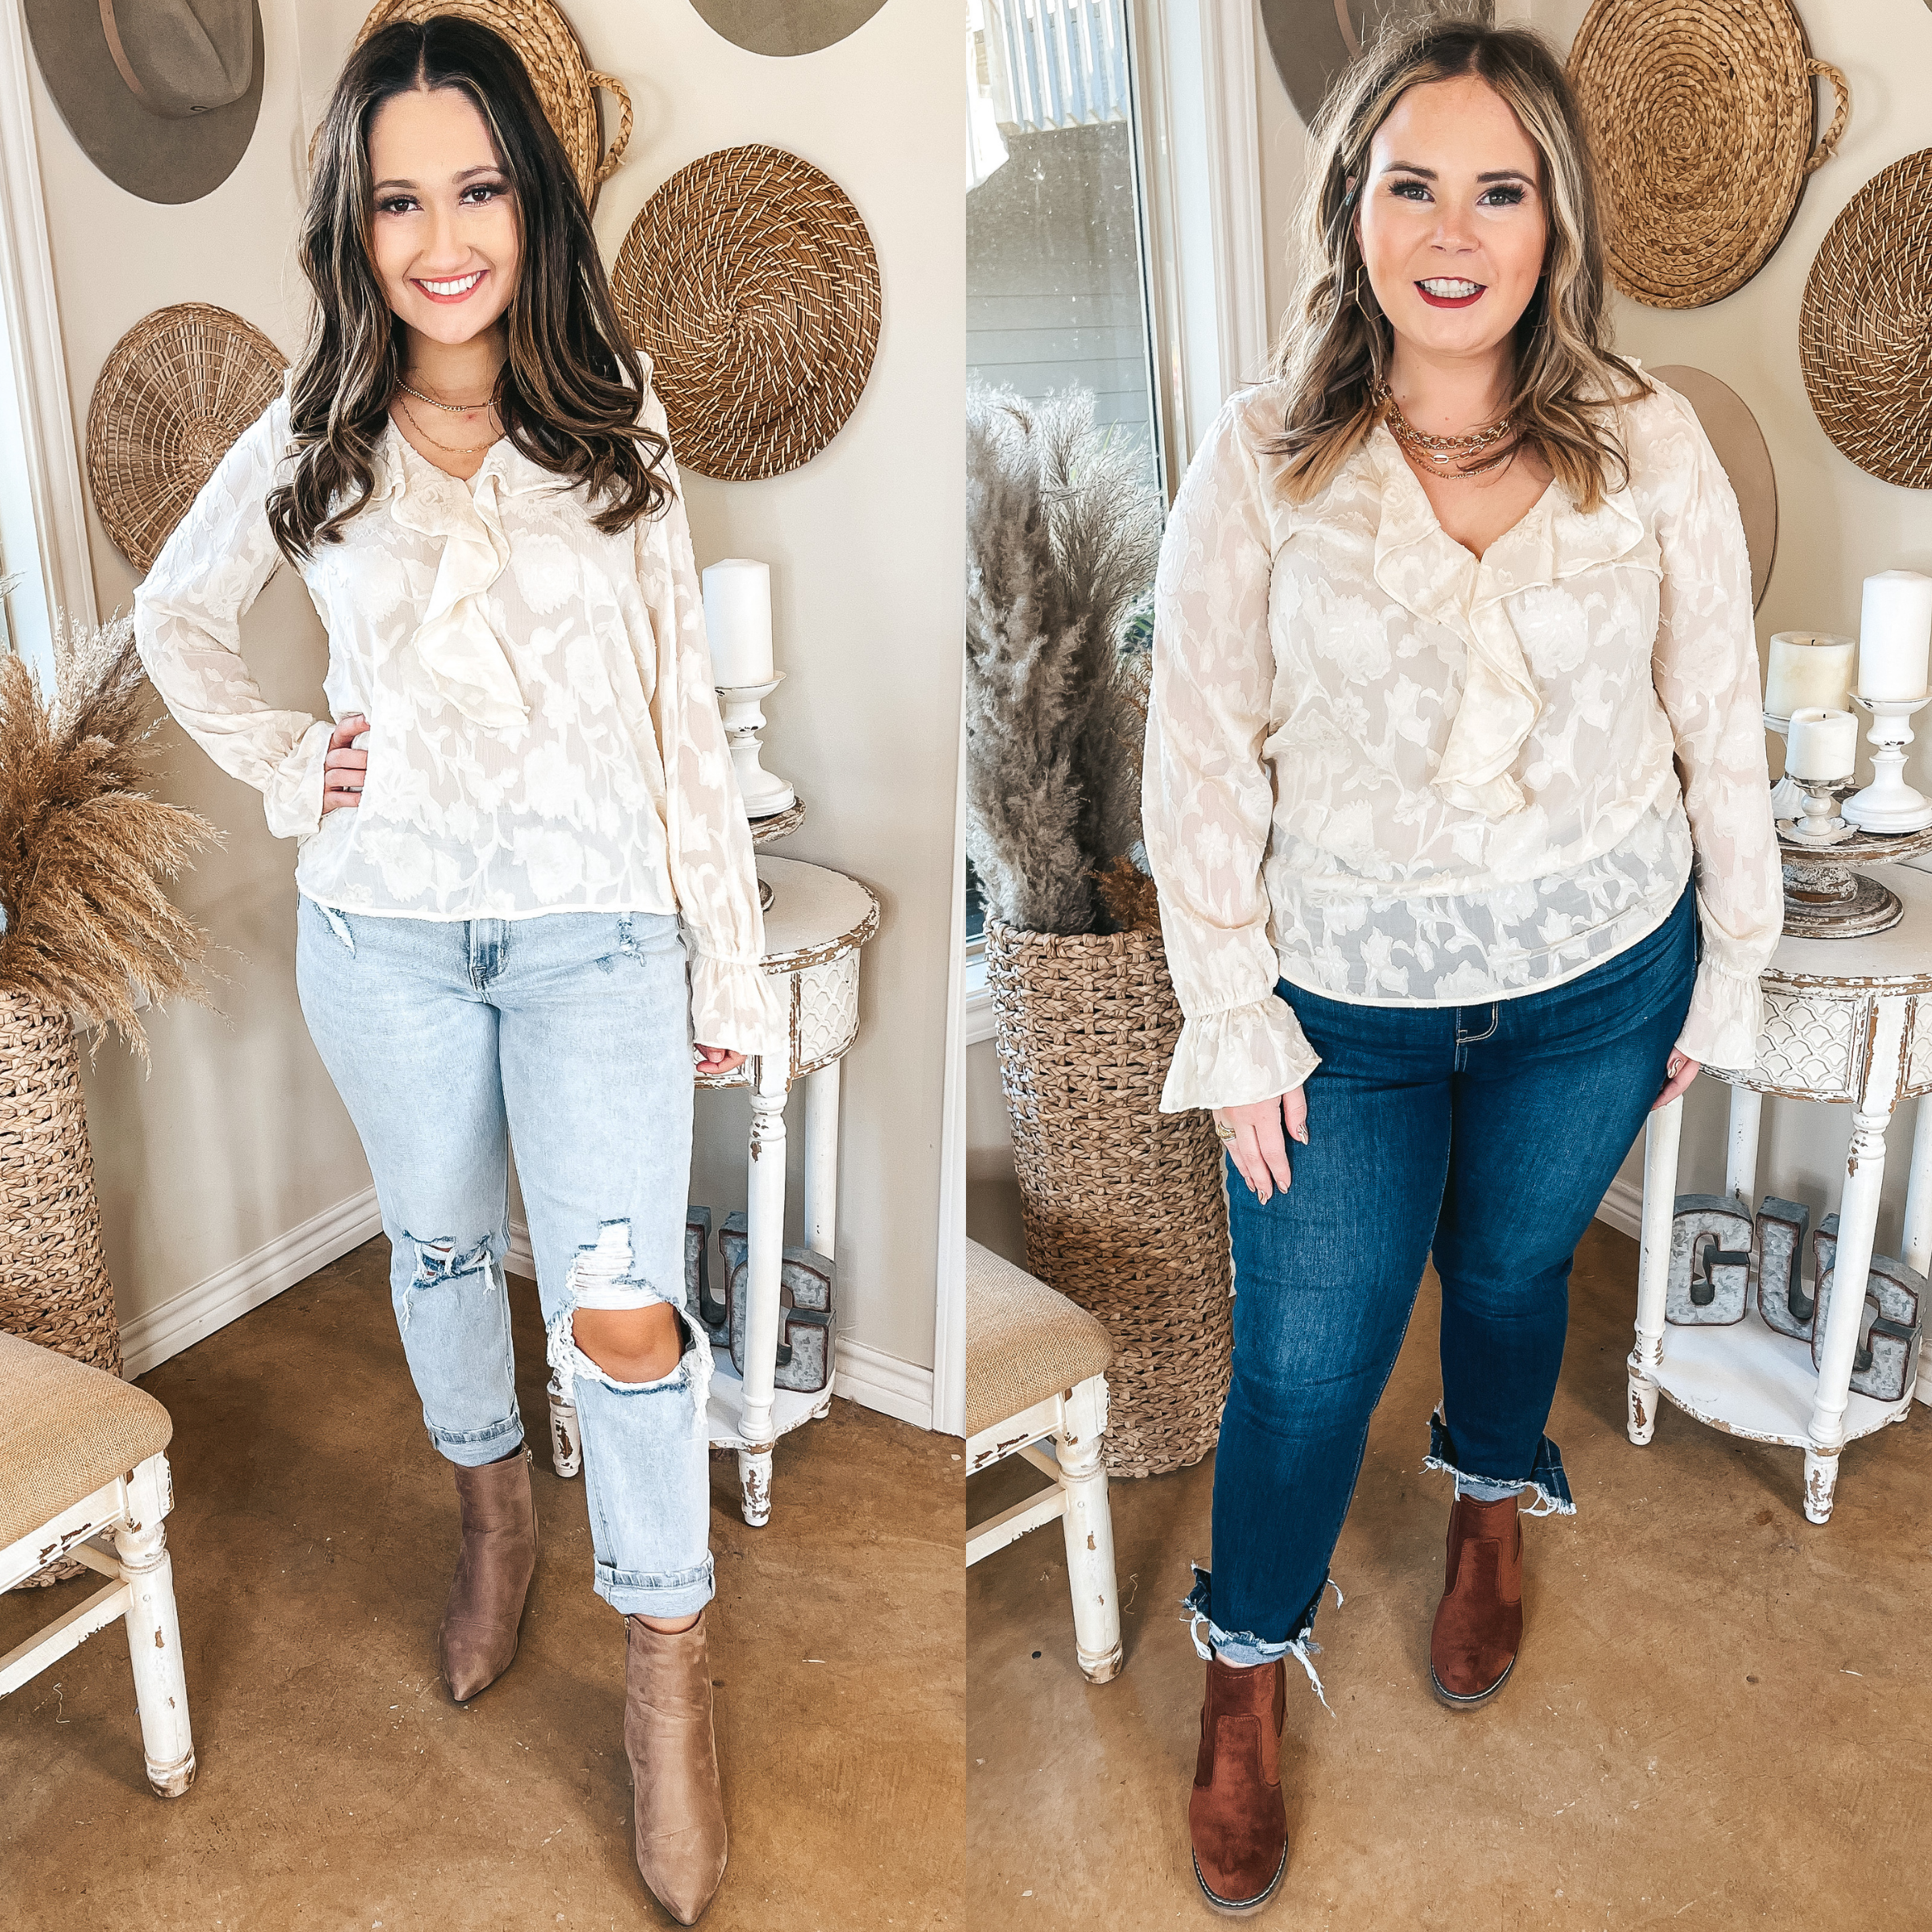 Models are wearing a shear floral blouse with long sleeves and a ruffle front. Size small model has it paired with light wash jeans, taupe booties, and gold jewelry. Size large model has it paired with dark wash skinny jeans, brown booties, and gold jewelry.